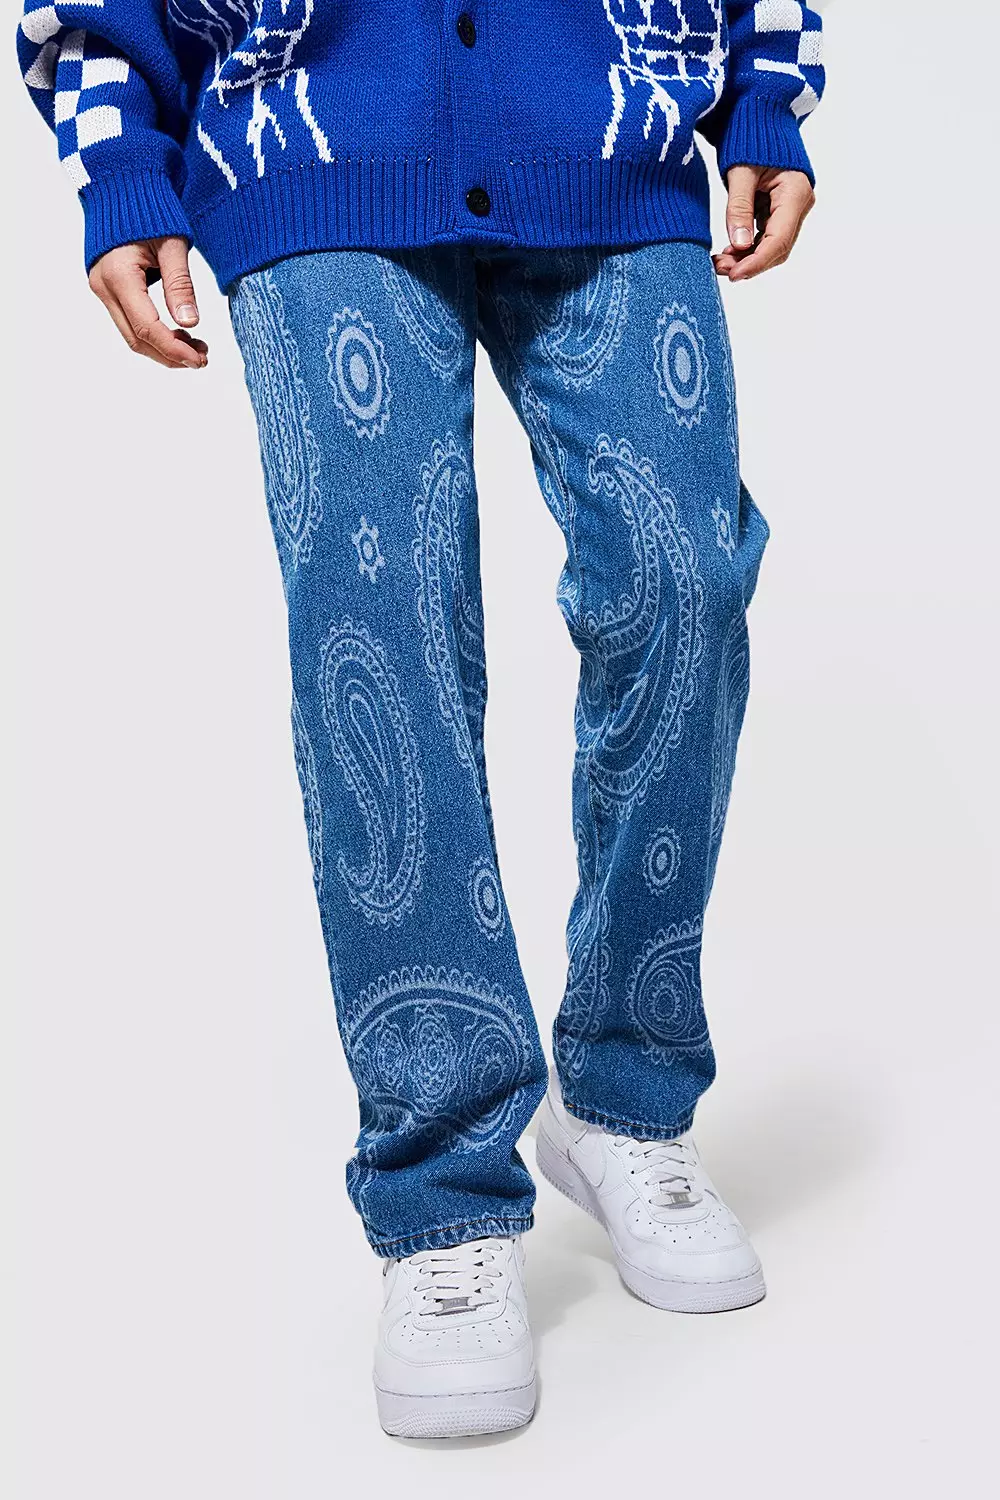 Relaxed Fit Paisley Print Jeans boohooMAN USA 